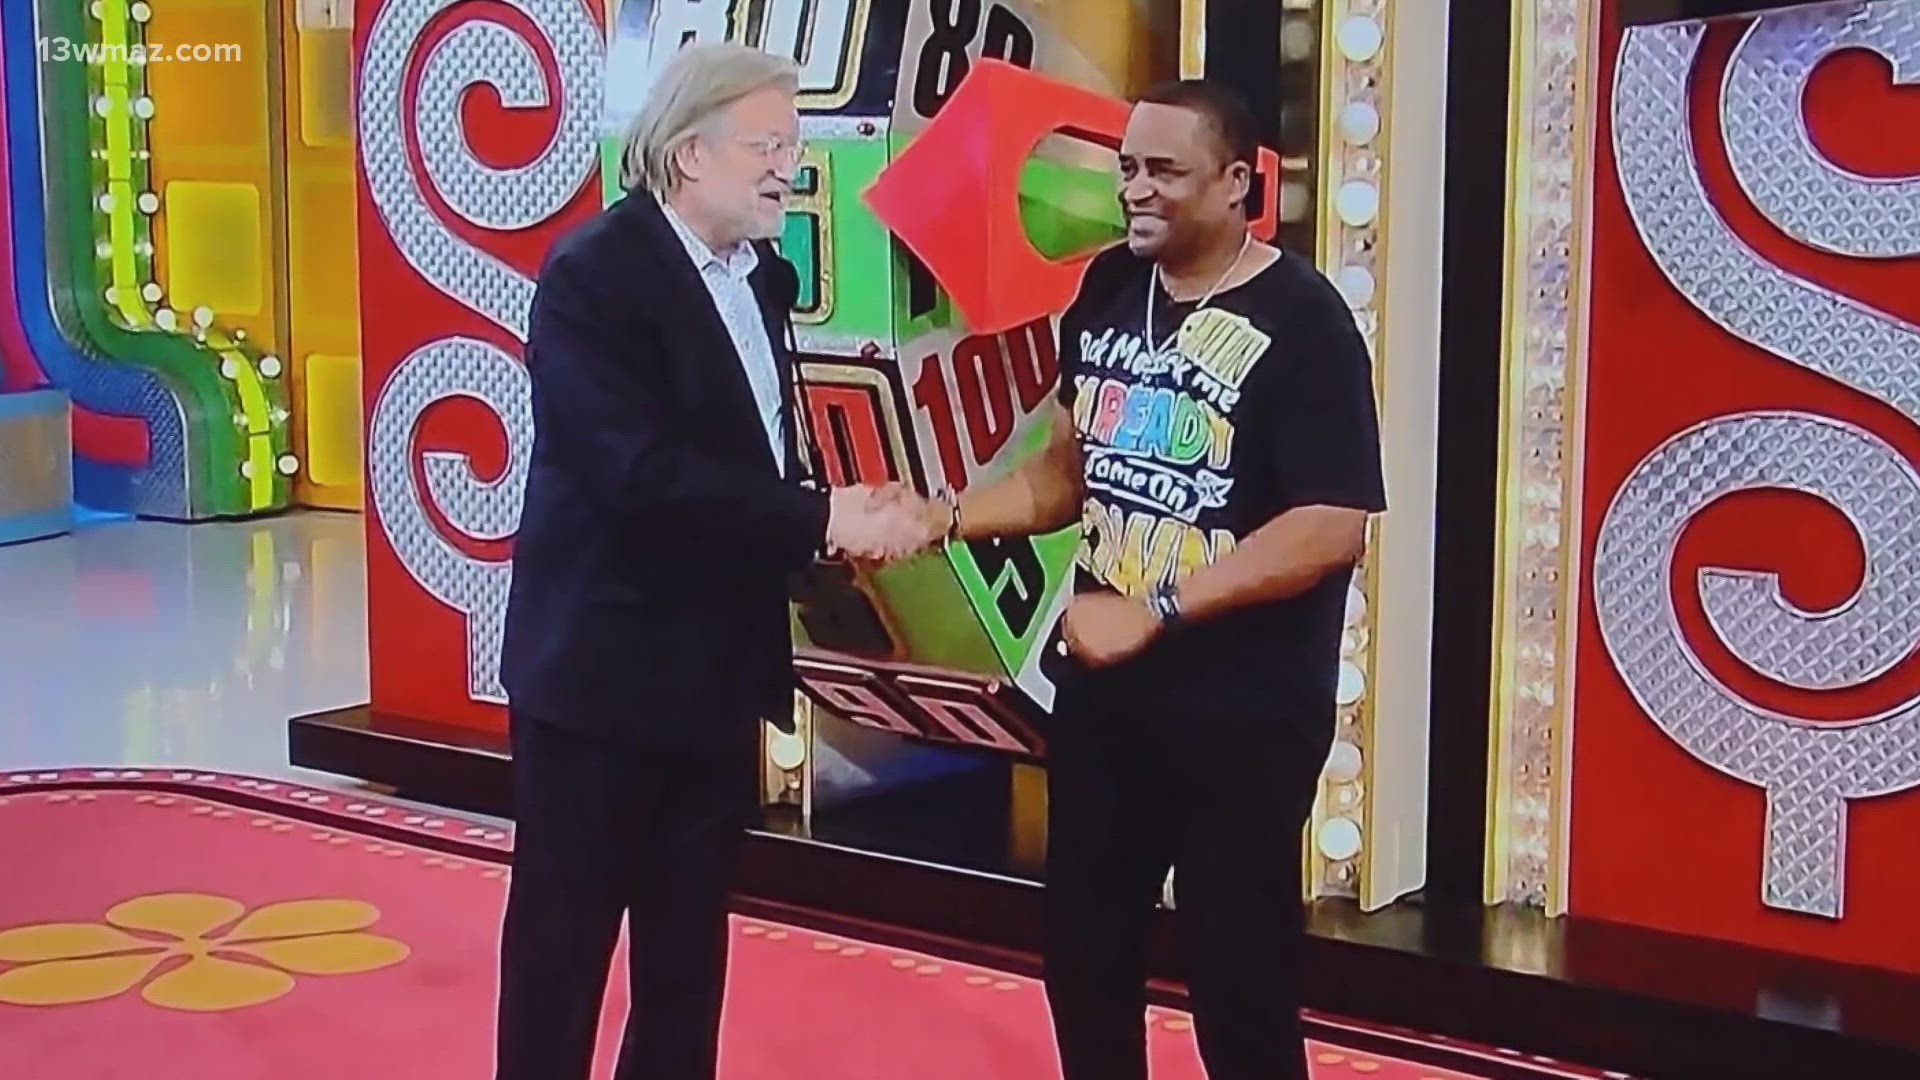 Linton Veal, the guy who spent most of his life in Washington County working for a kaolin company, saw a lot of excitement on The Price is Right.